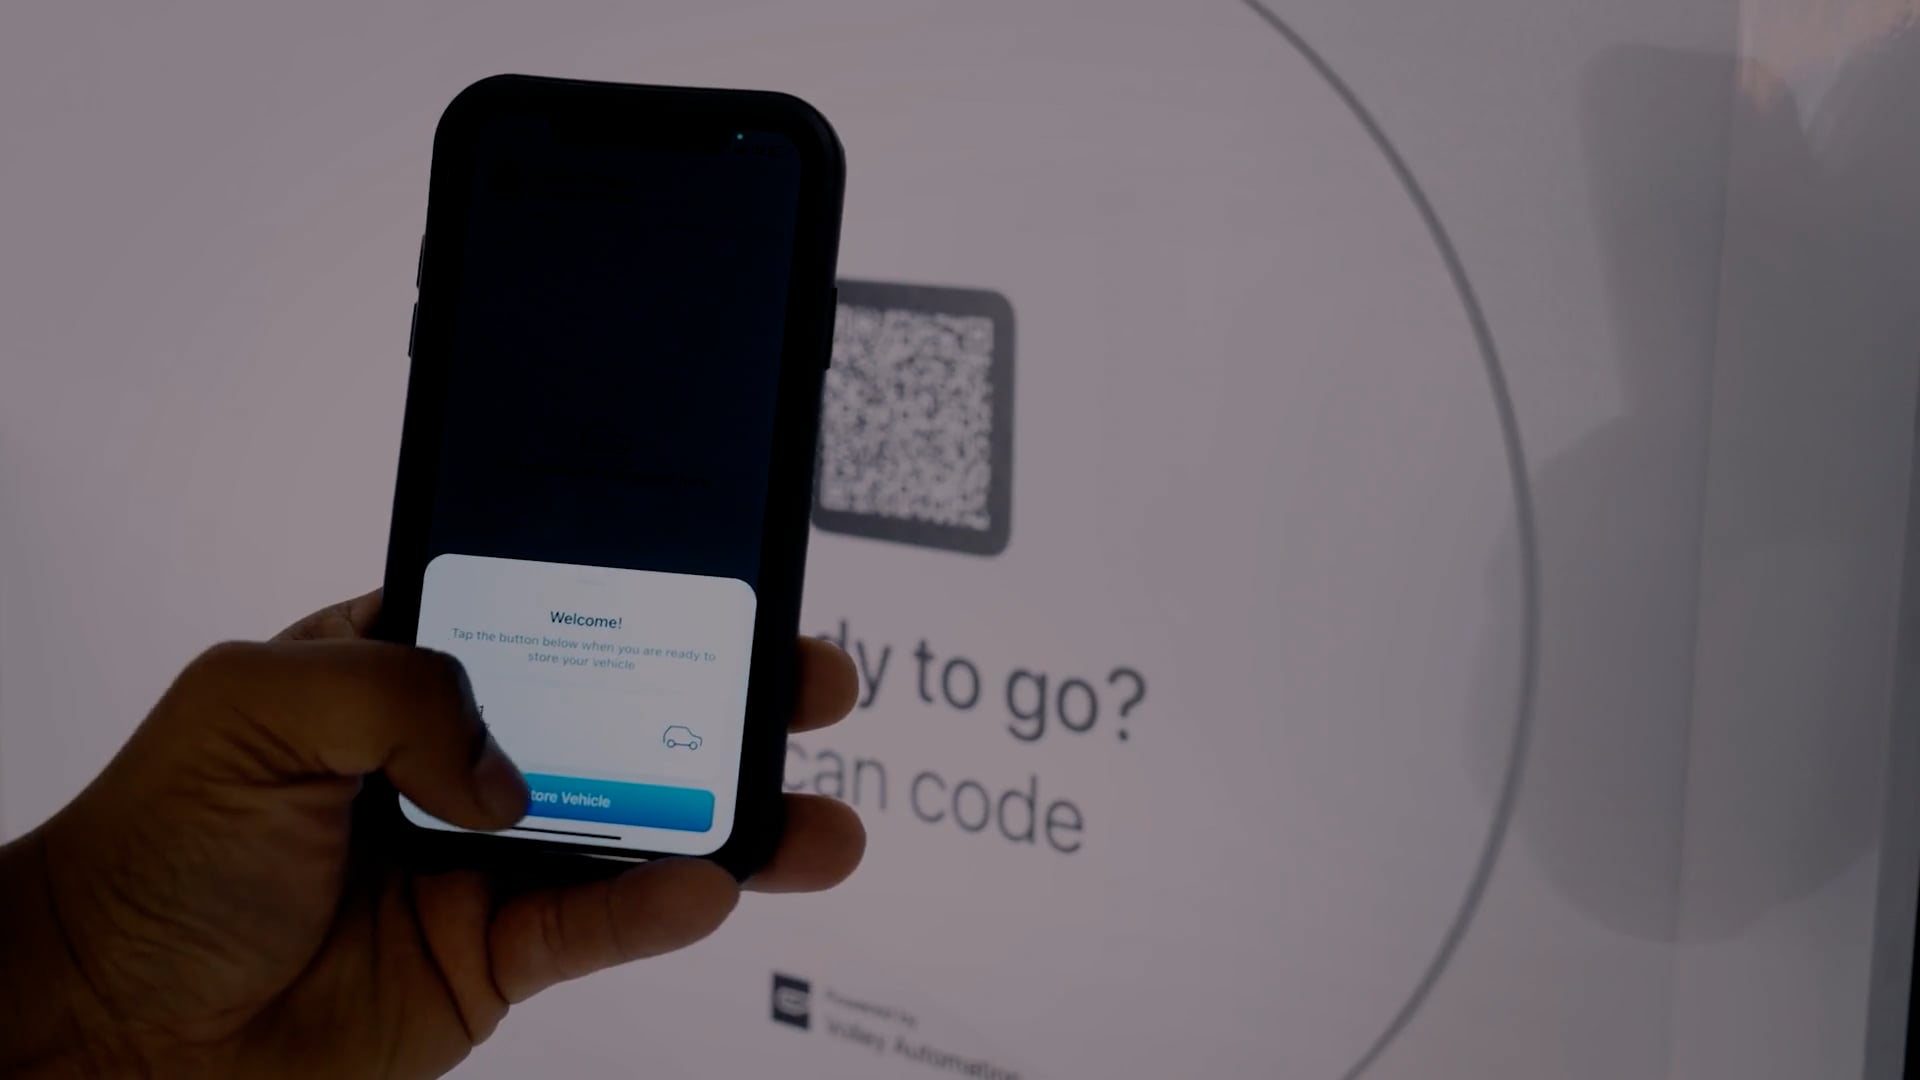 A person's hand holding a smartphone with a notification on the screen, near a digital screen displaying a qr code. The environment suggests an interactive or digital transaction setup.